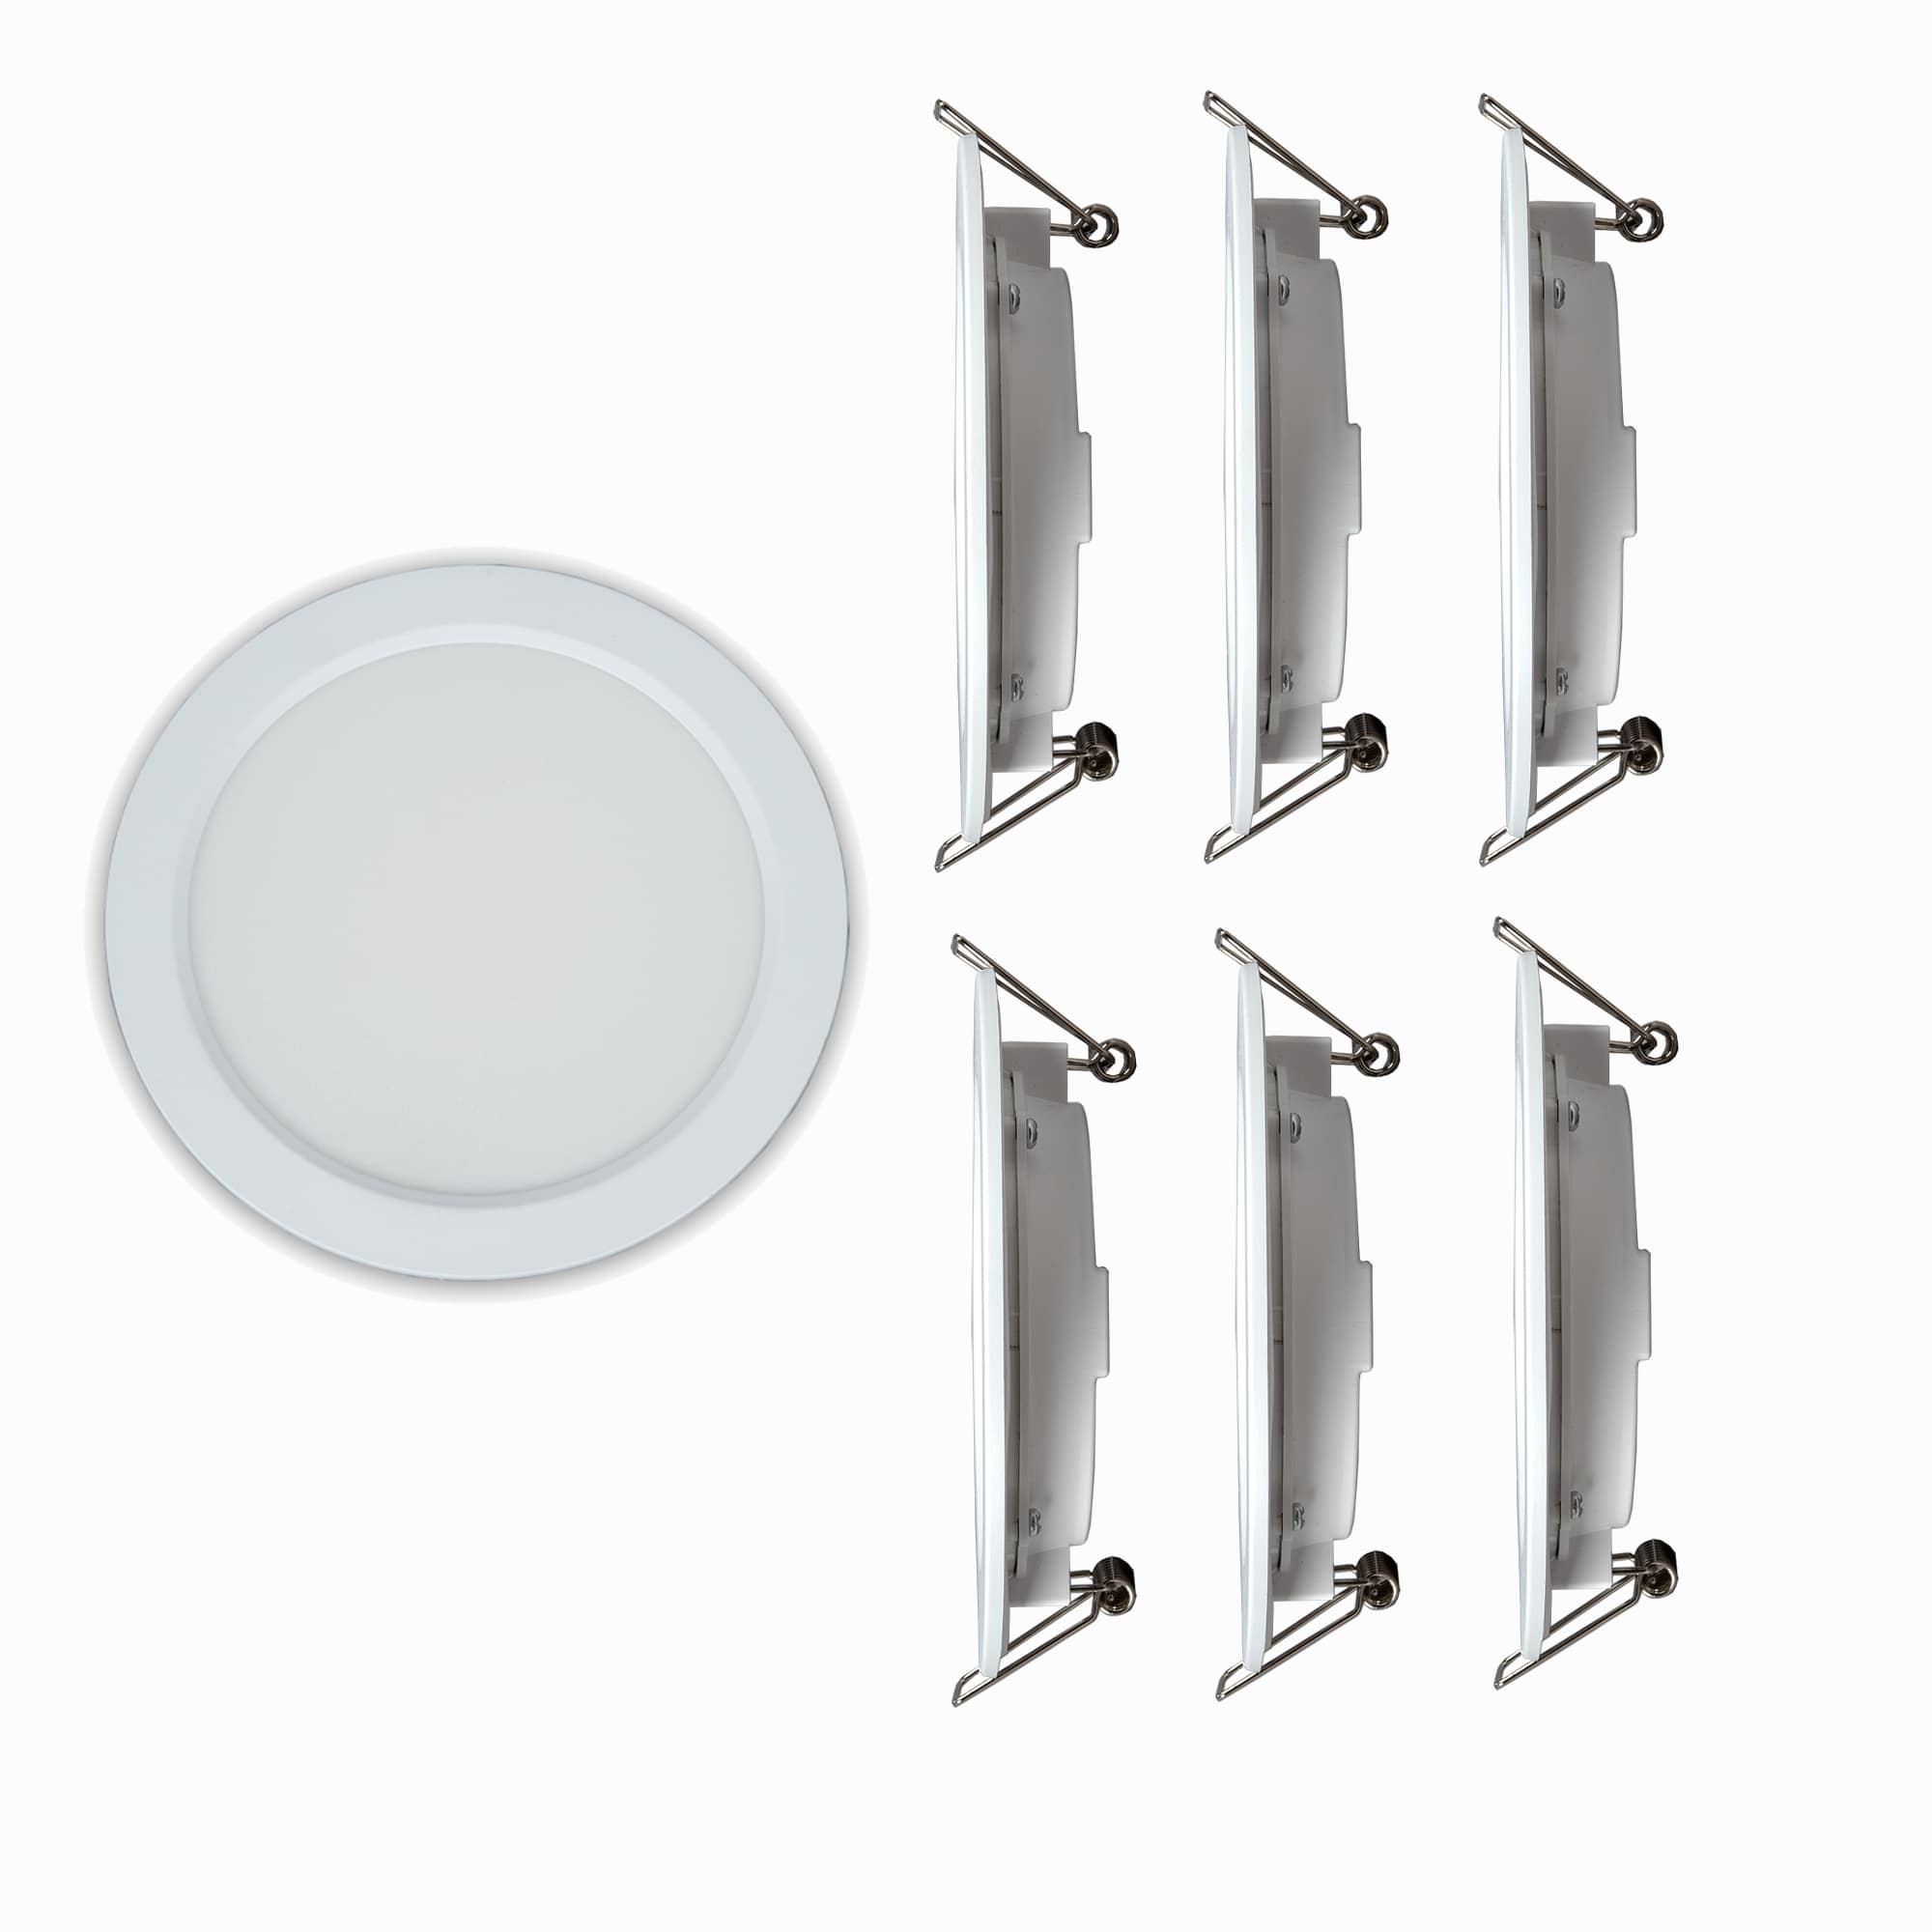 Energetic Lighting E2DLF 4-in 670-Lumen Switchable White Round Dimmable LED Canless Recessed Downlight (6-Pack) in Recessed Downlights department at Lowes.com